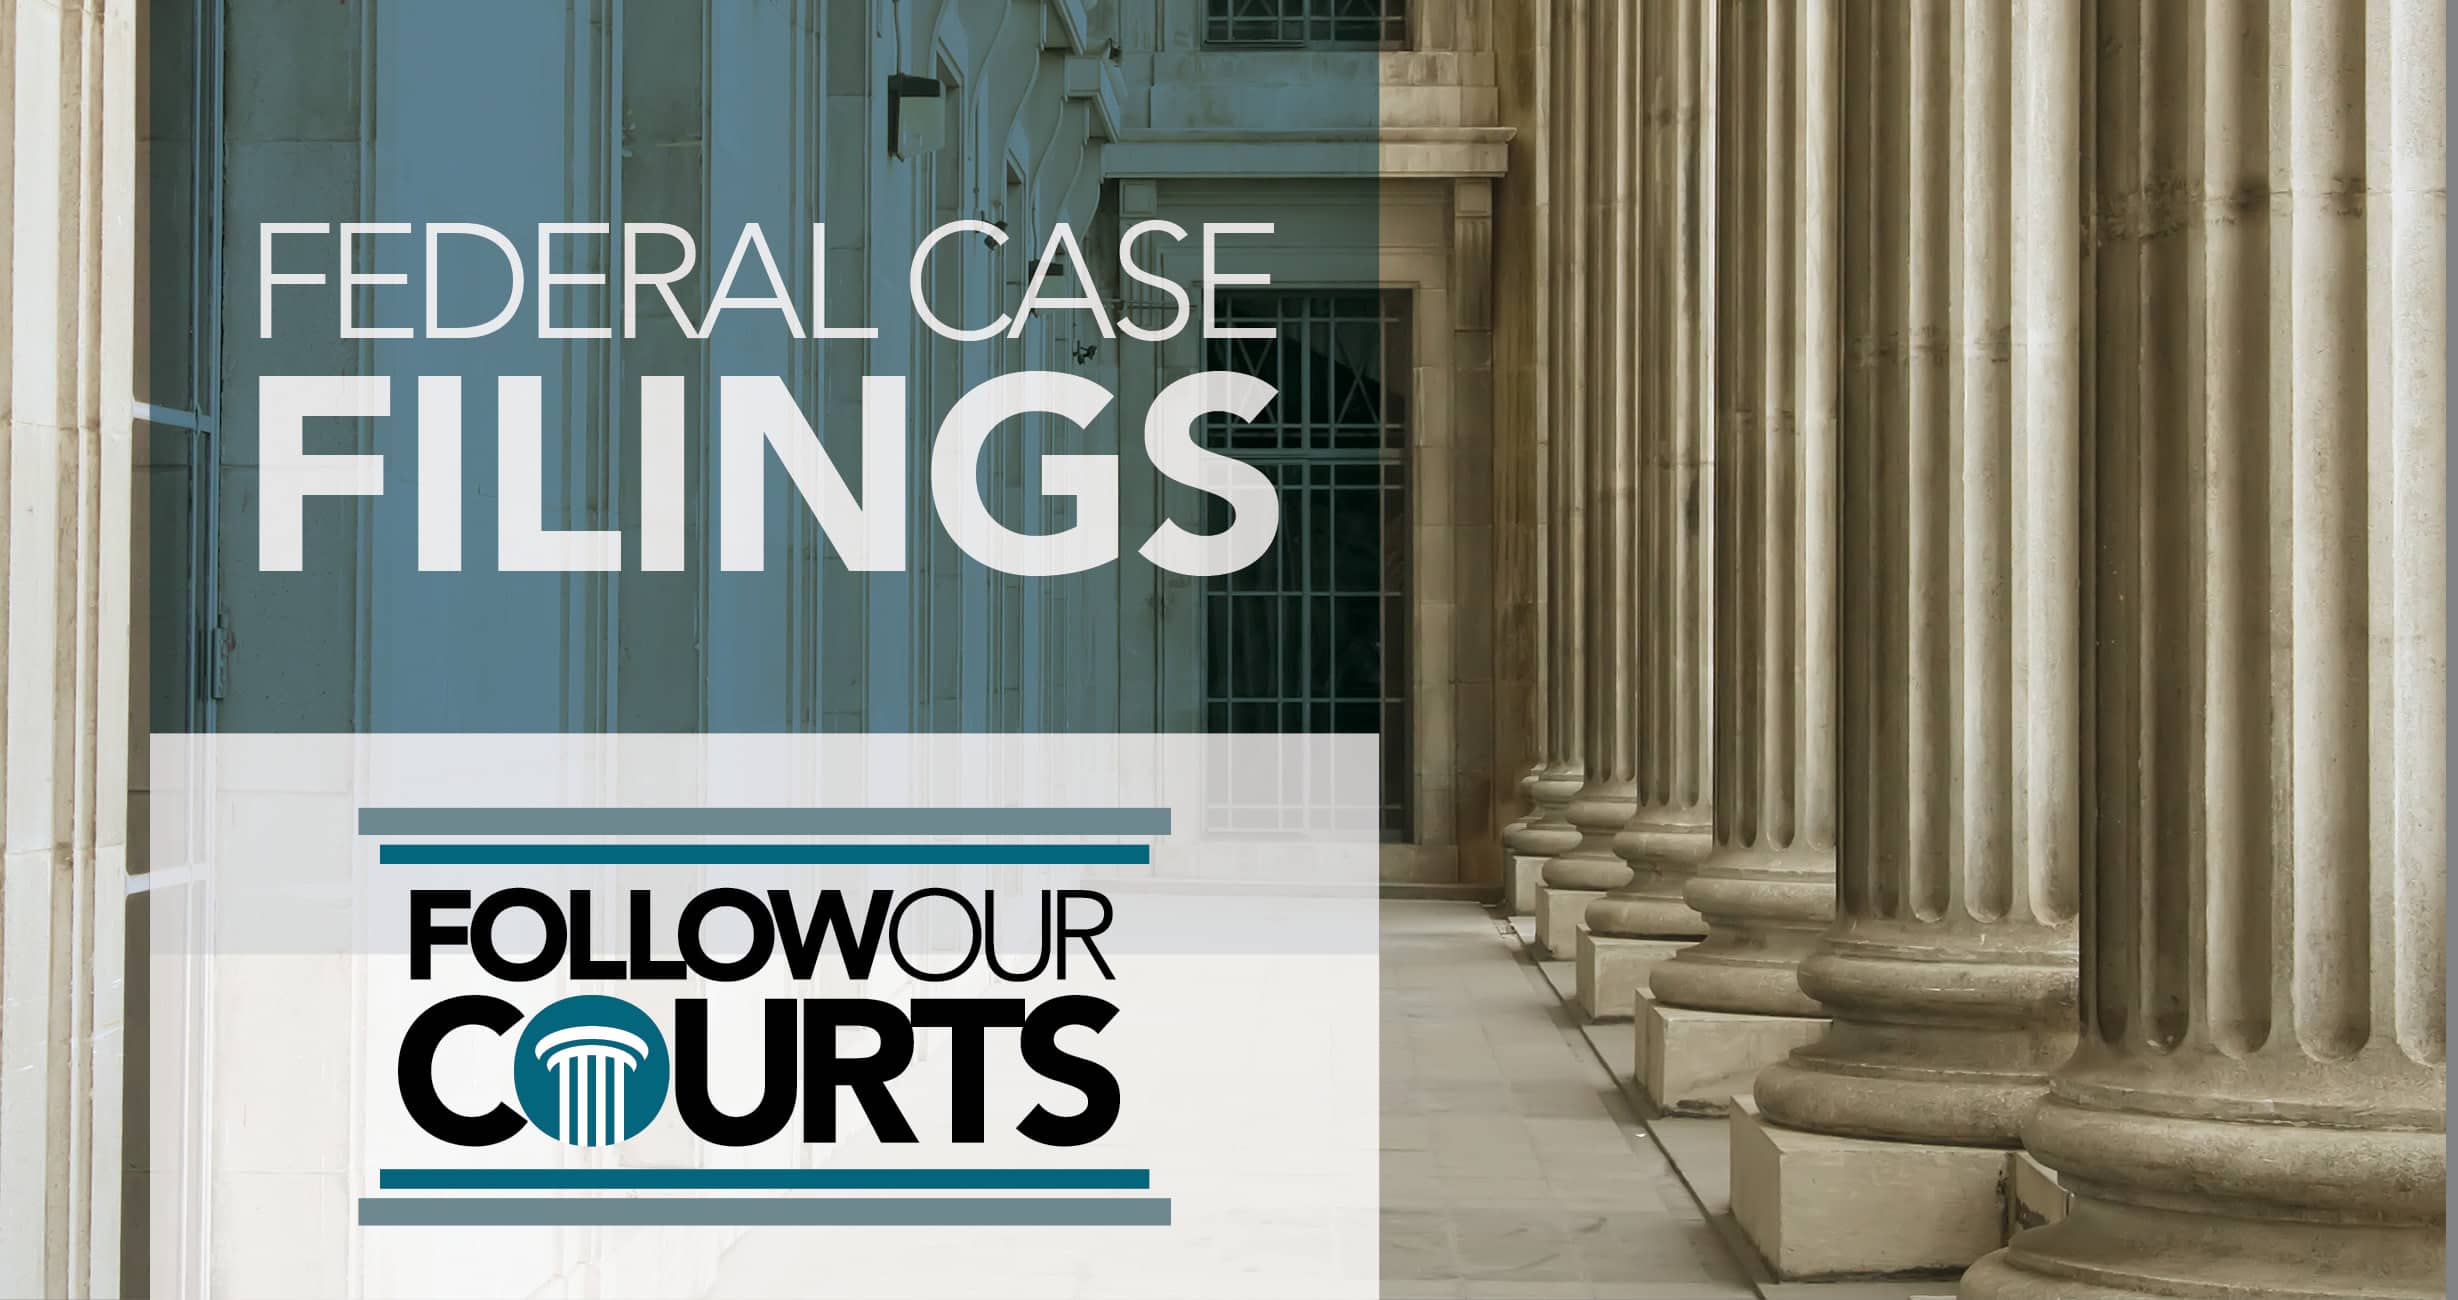 Federal case filings March 29